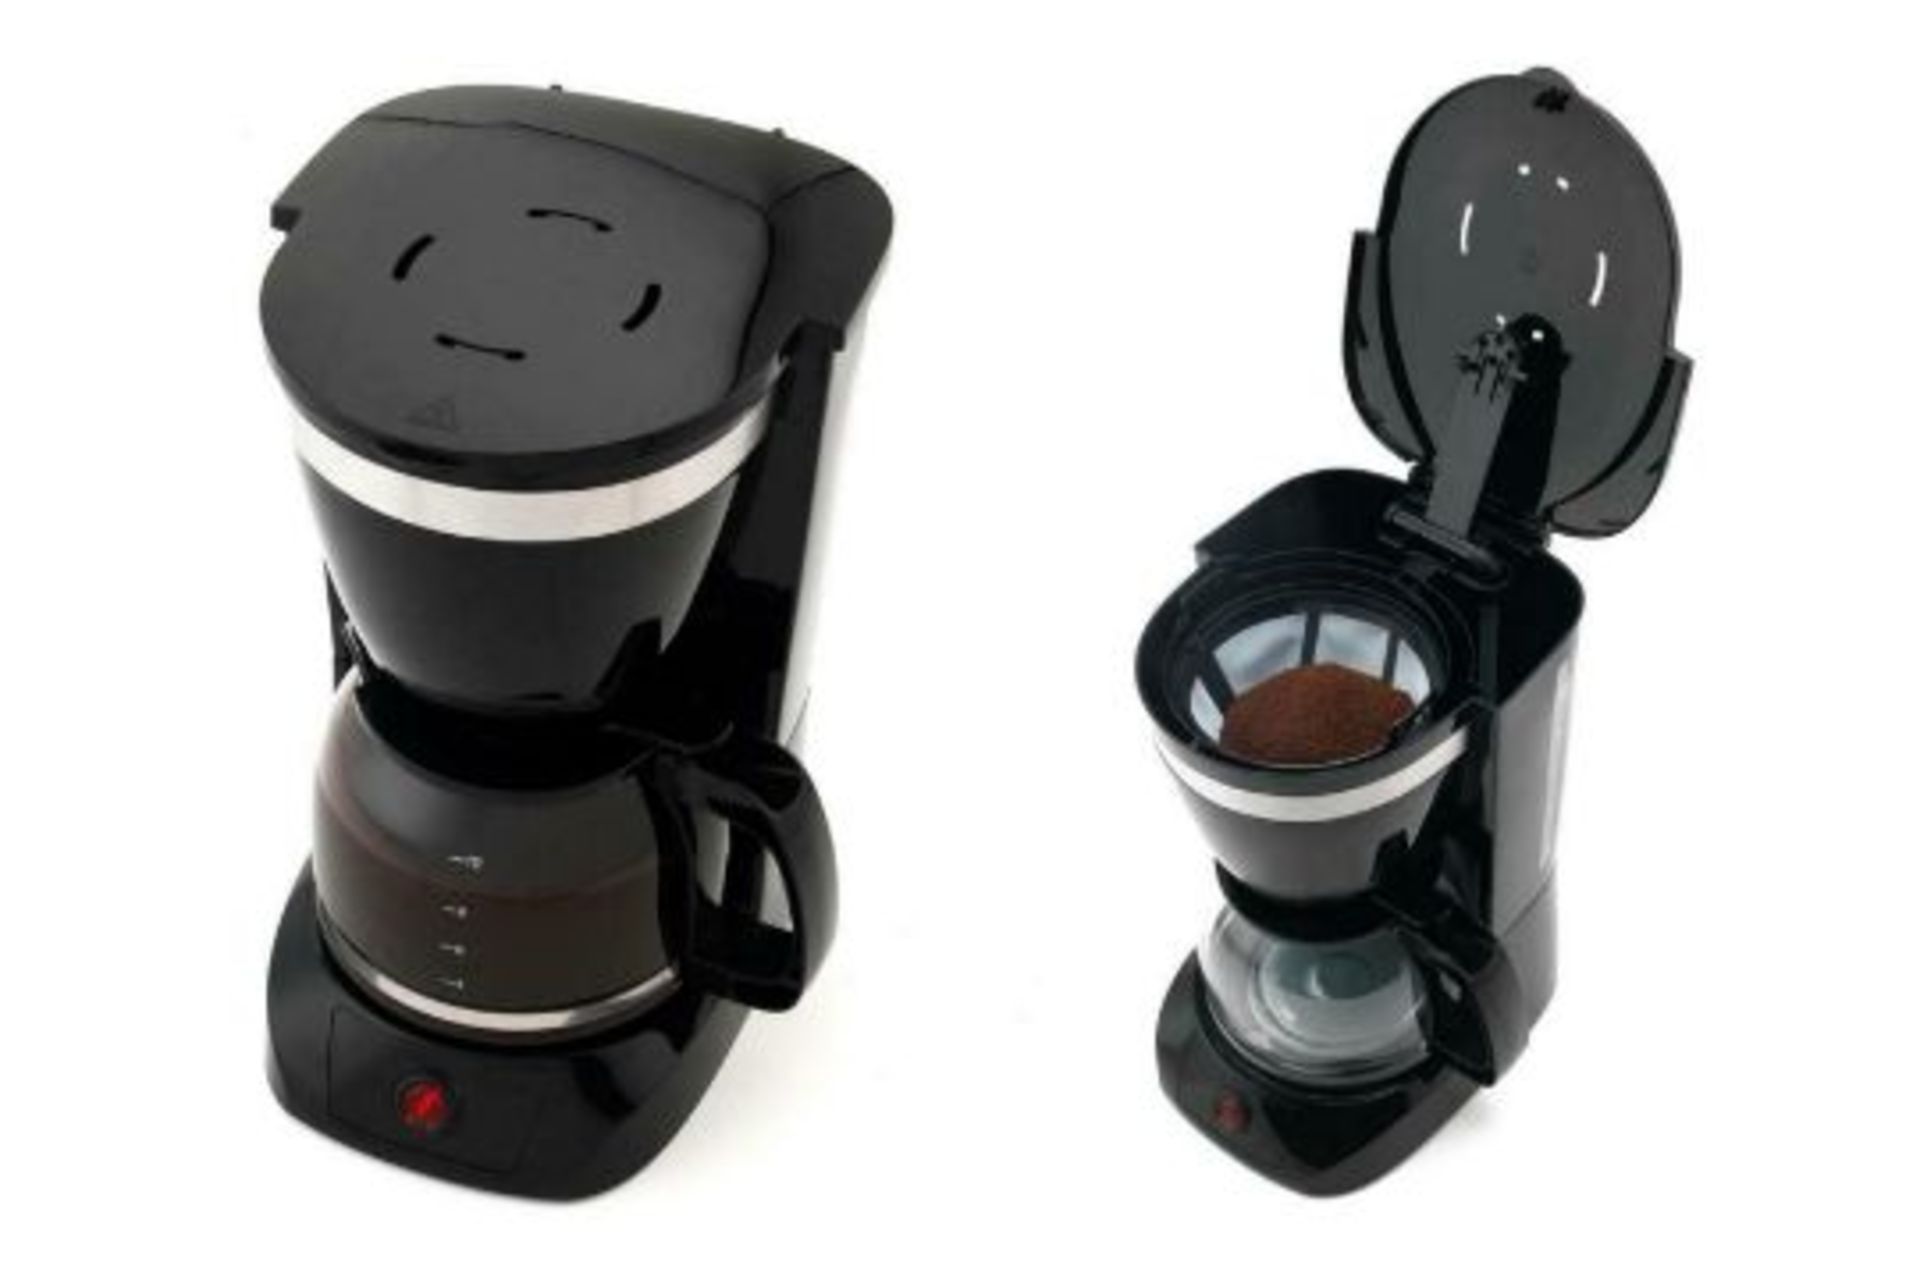 BRAND NEW SALTER DECO DRIP 1.25L 800W 10 CUP COFFEE MAKER - RRP £24. - Image 2 of 2